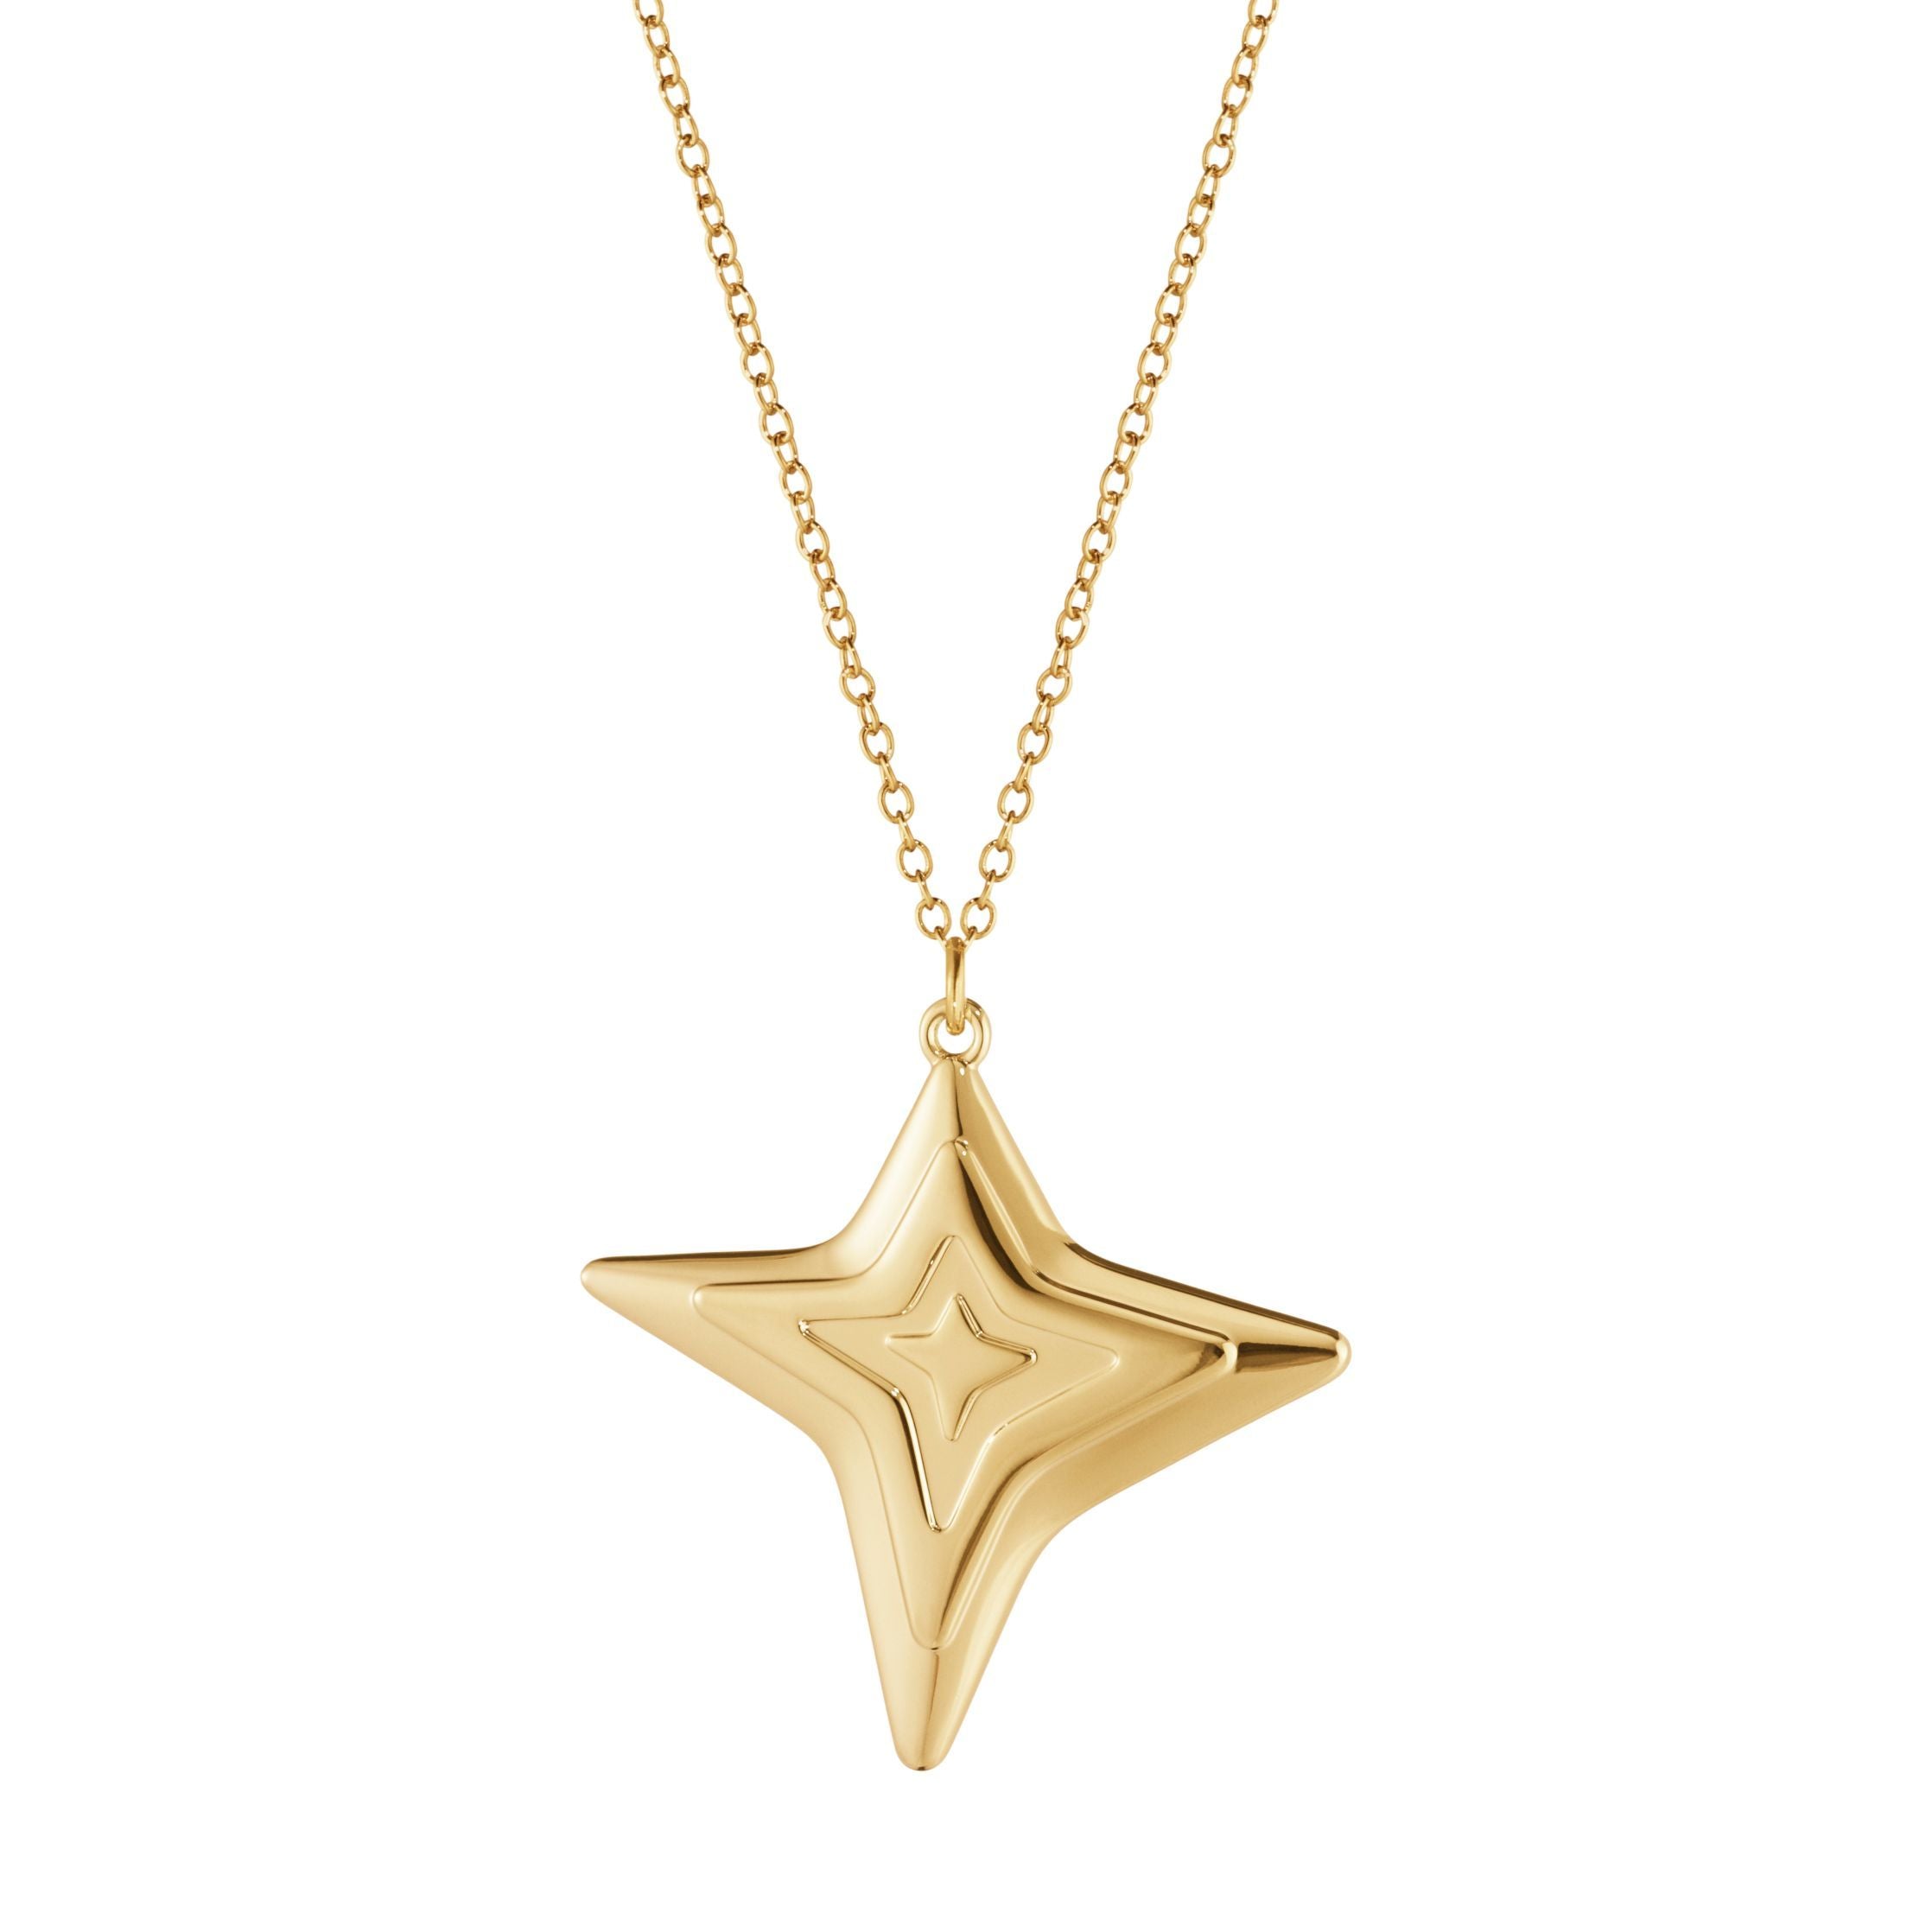 Georg Jensen Ornament Four Pointed Star, Gilded